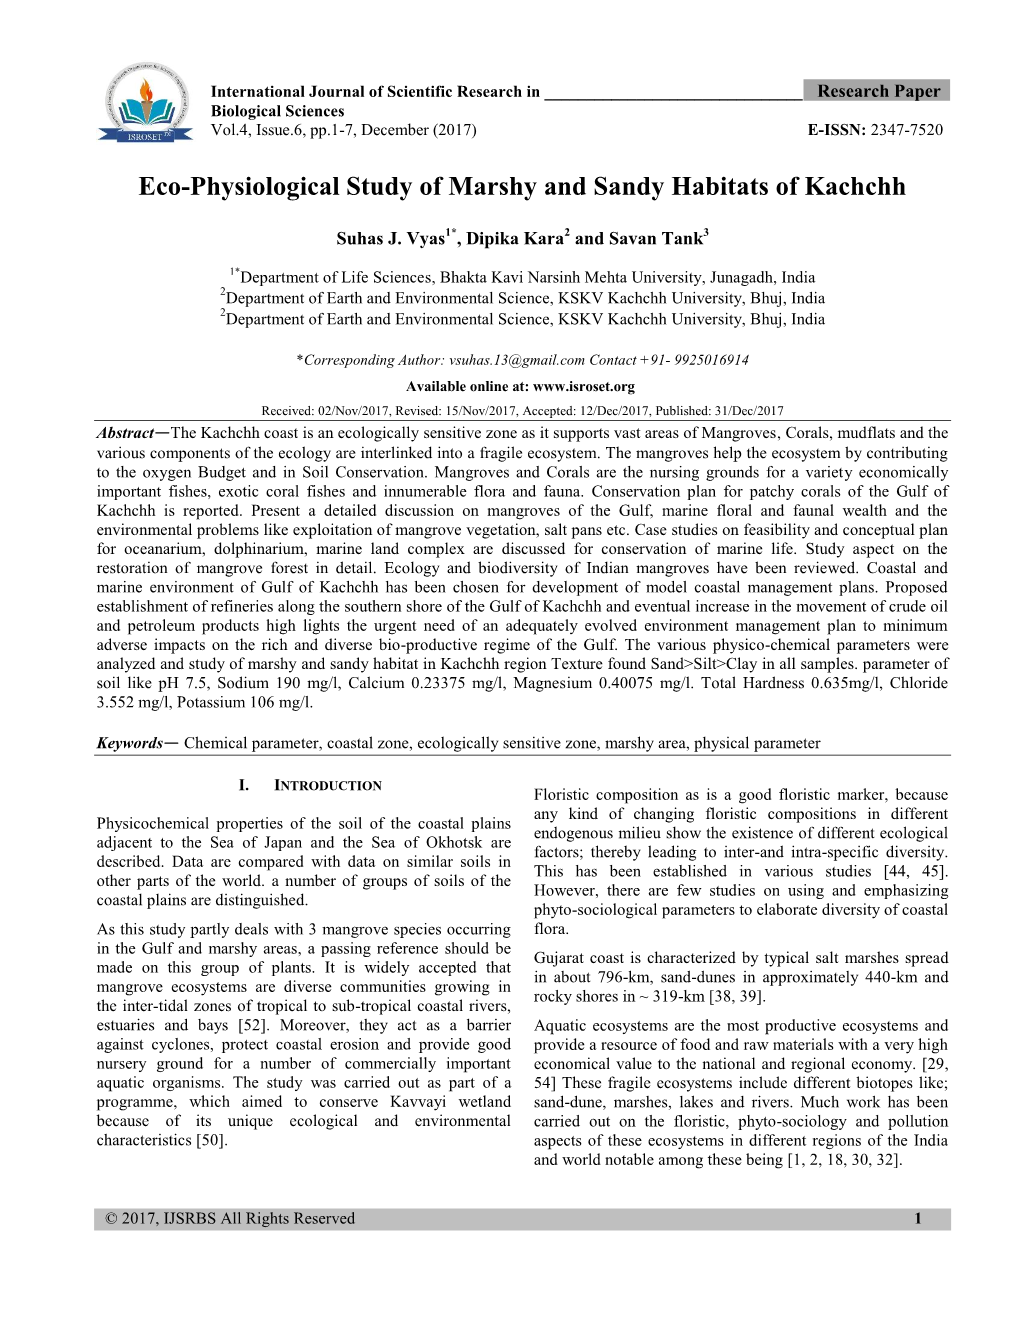 Eco-Physiological Study of Marshy and Sandy Habitats of Kachchh